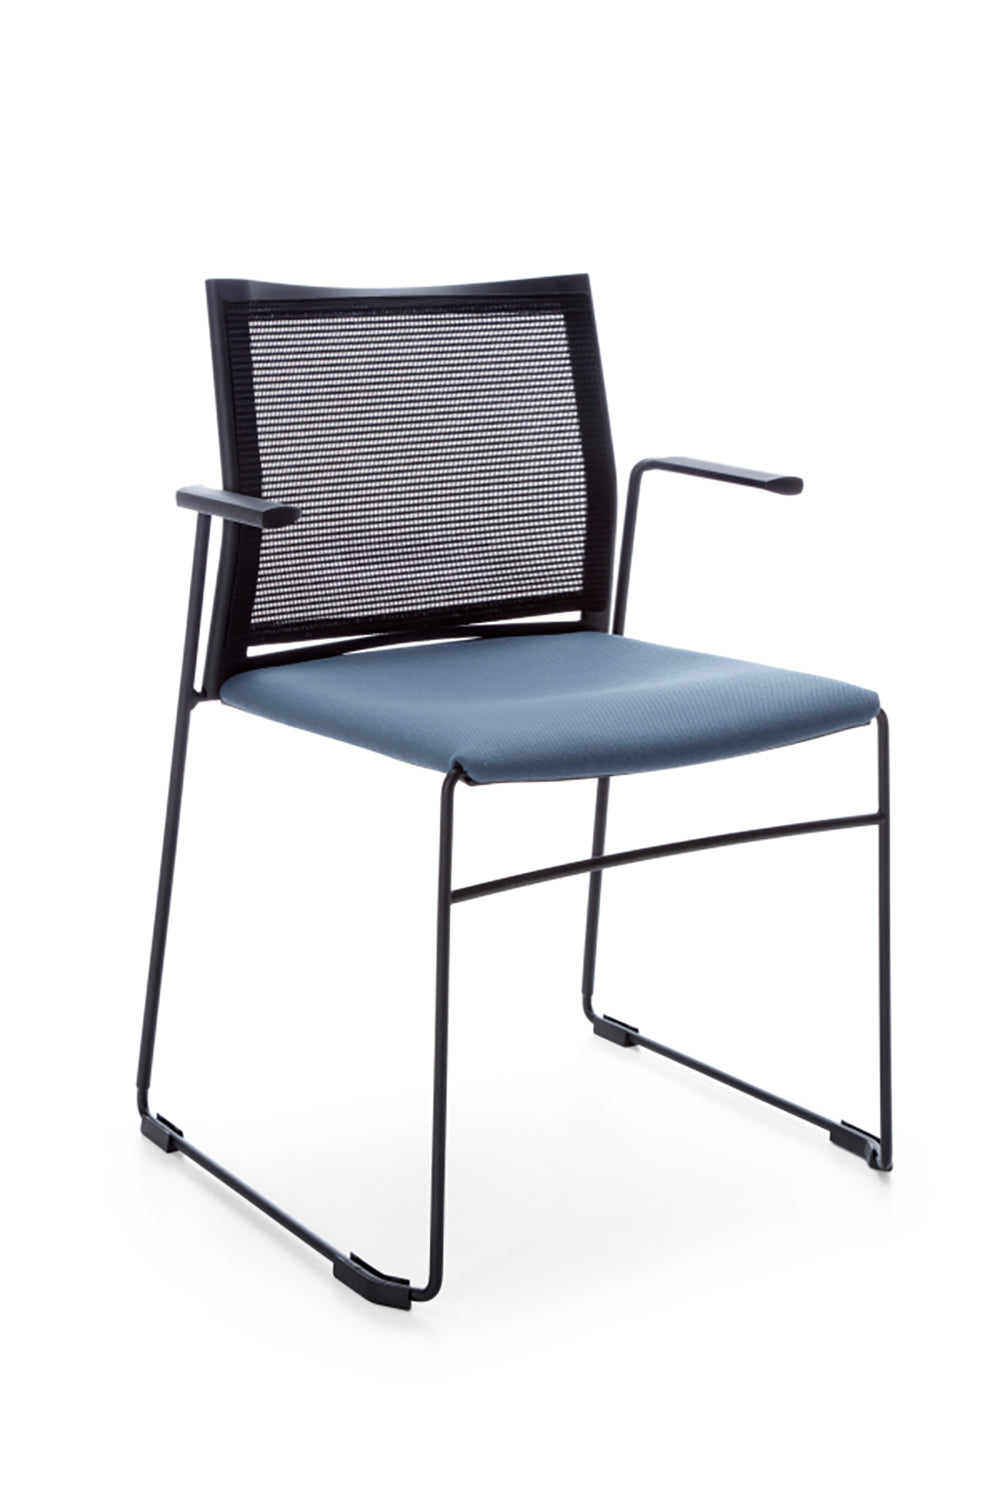 Ariz 575V 2P Upholstered Seat And Mesh Back Armchair With Armrests